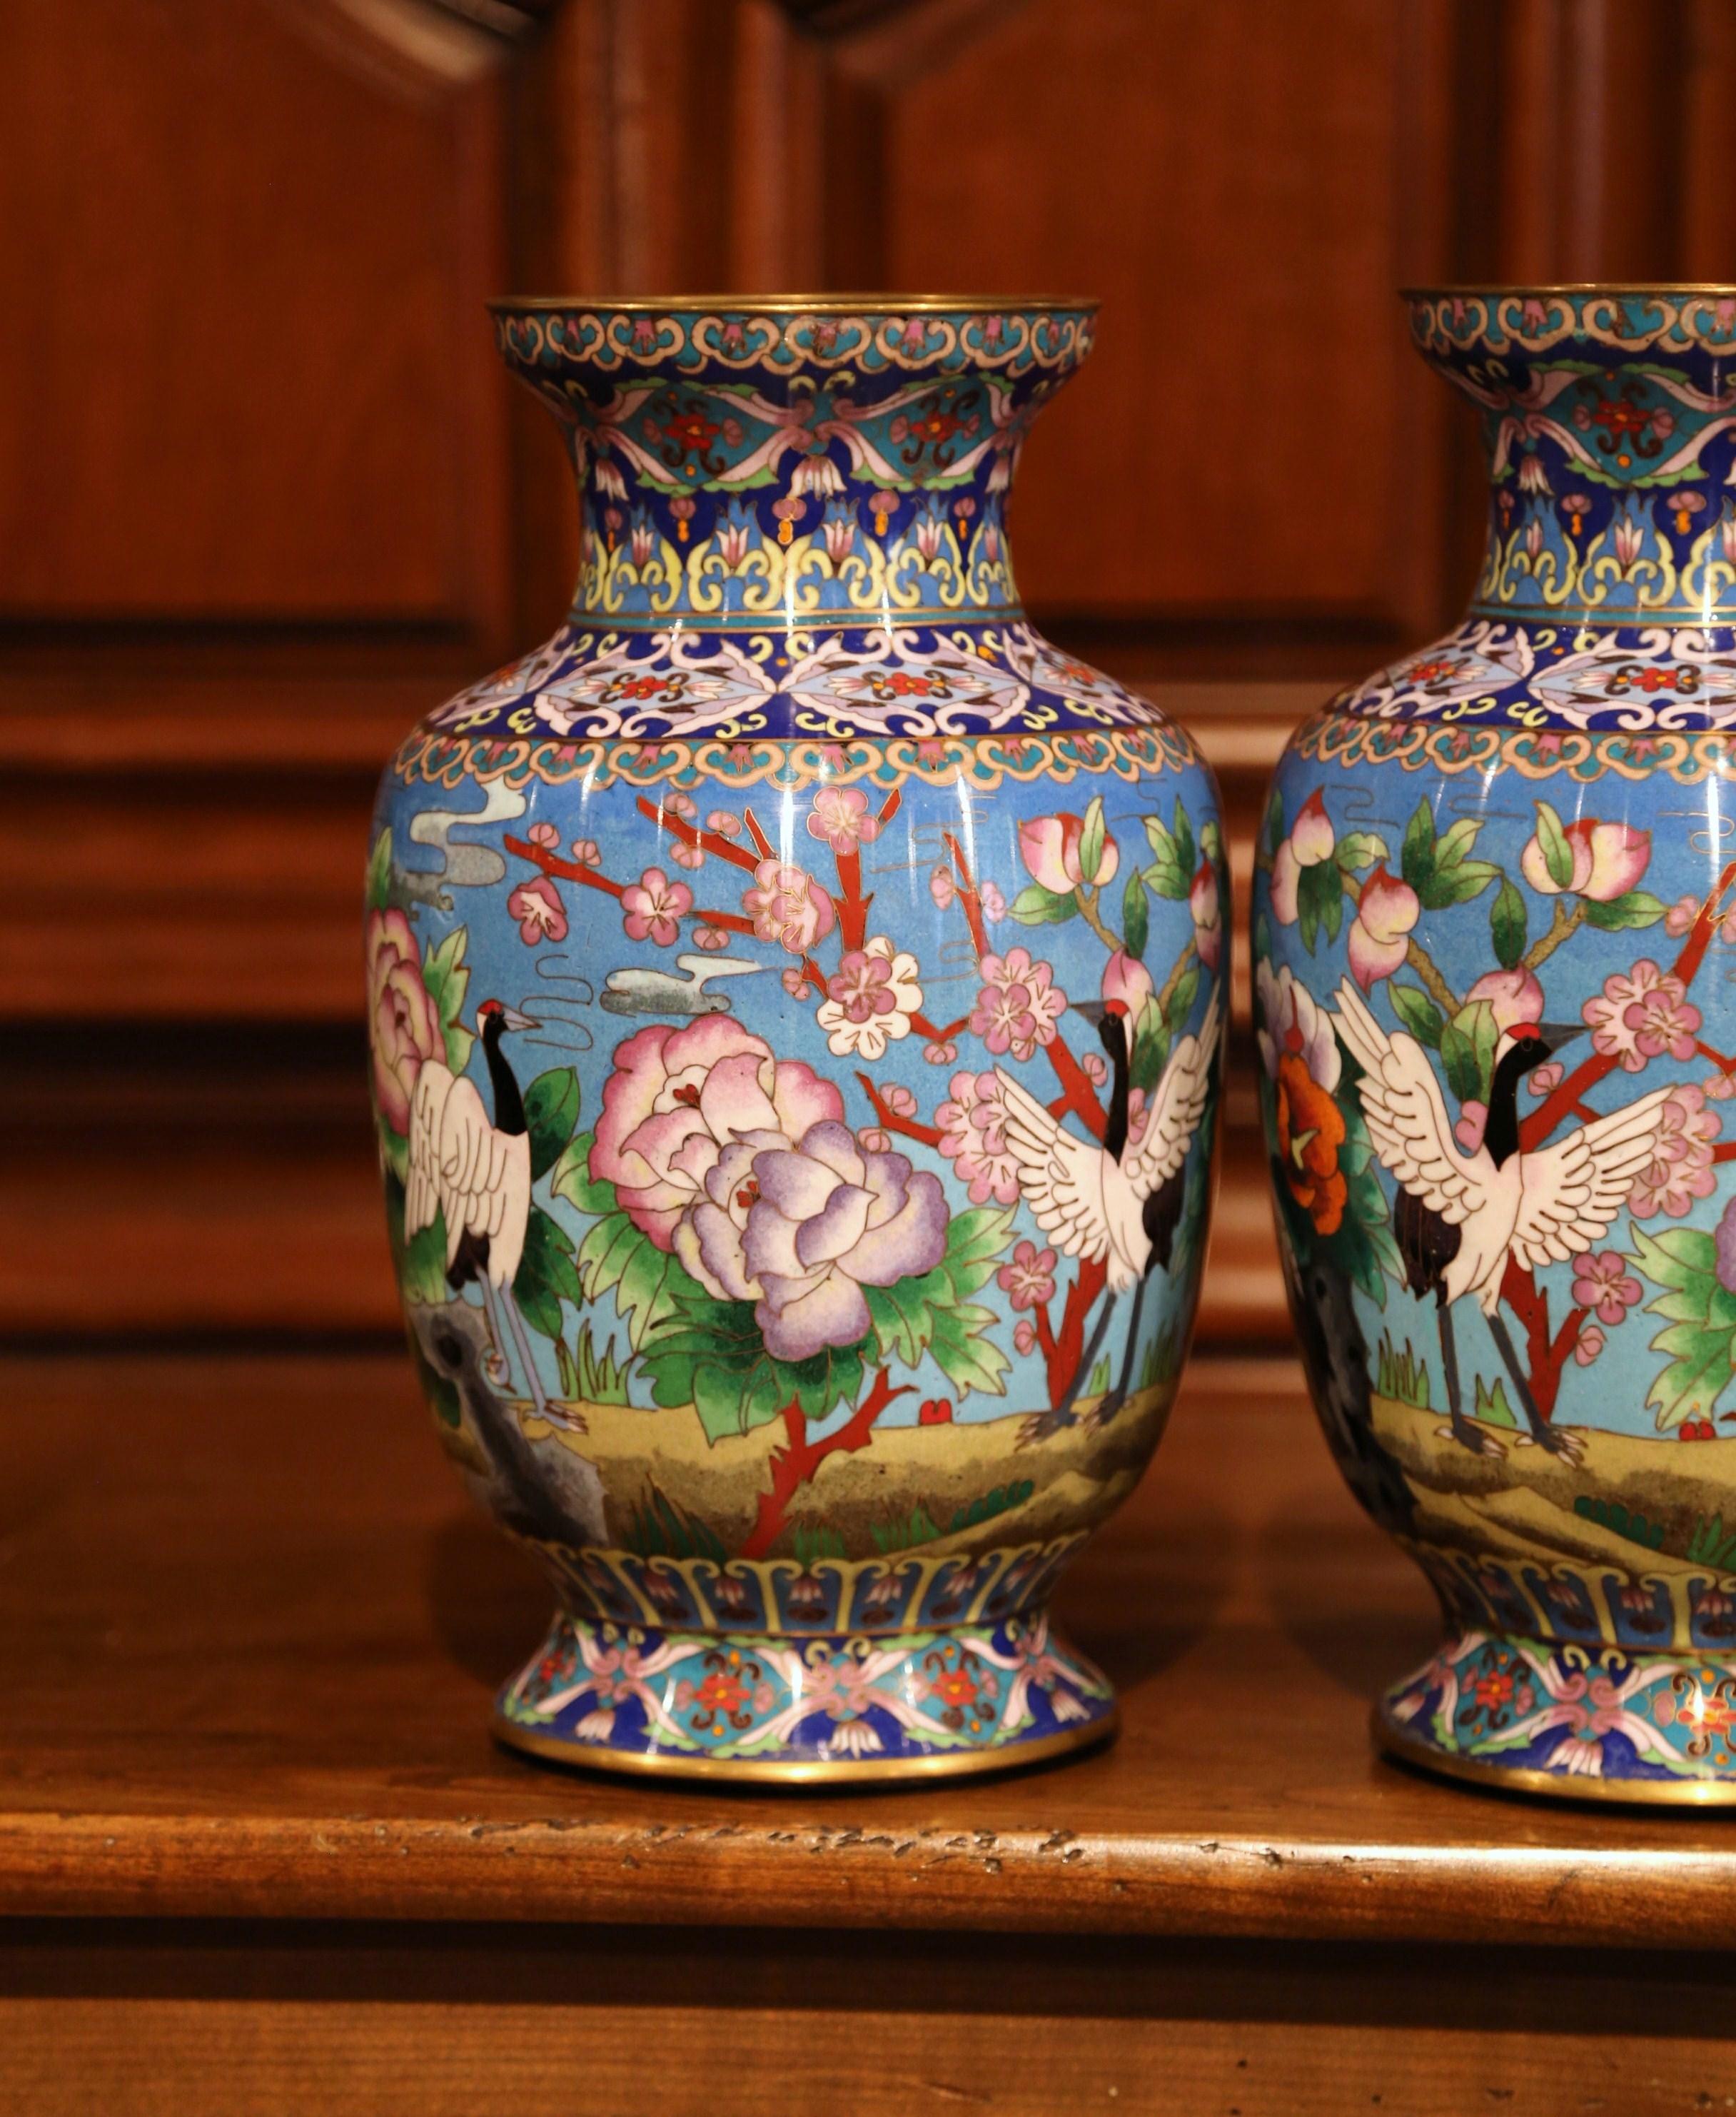 Cloissoné Pair of Mid-20th Century Chinese Cloisonné Vases with Bird and Floral Decor